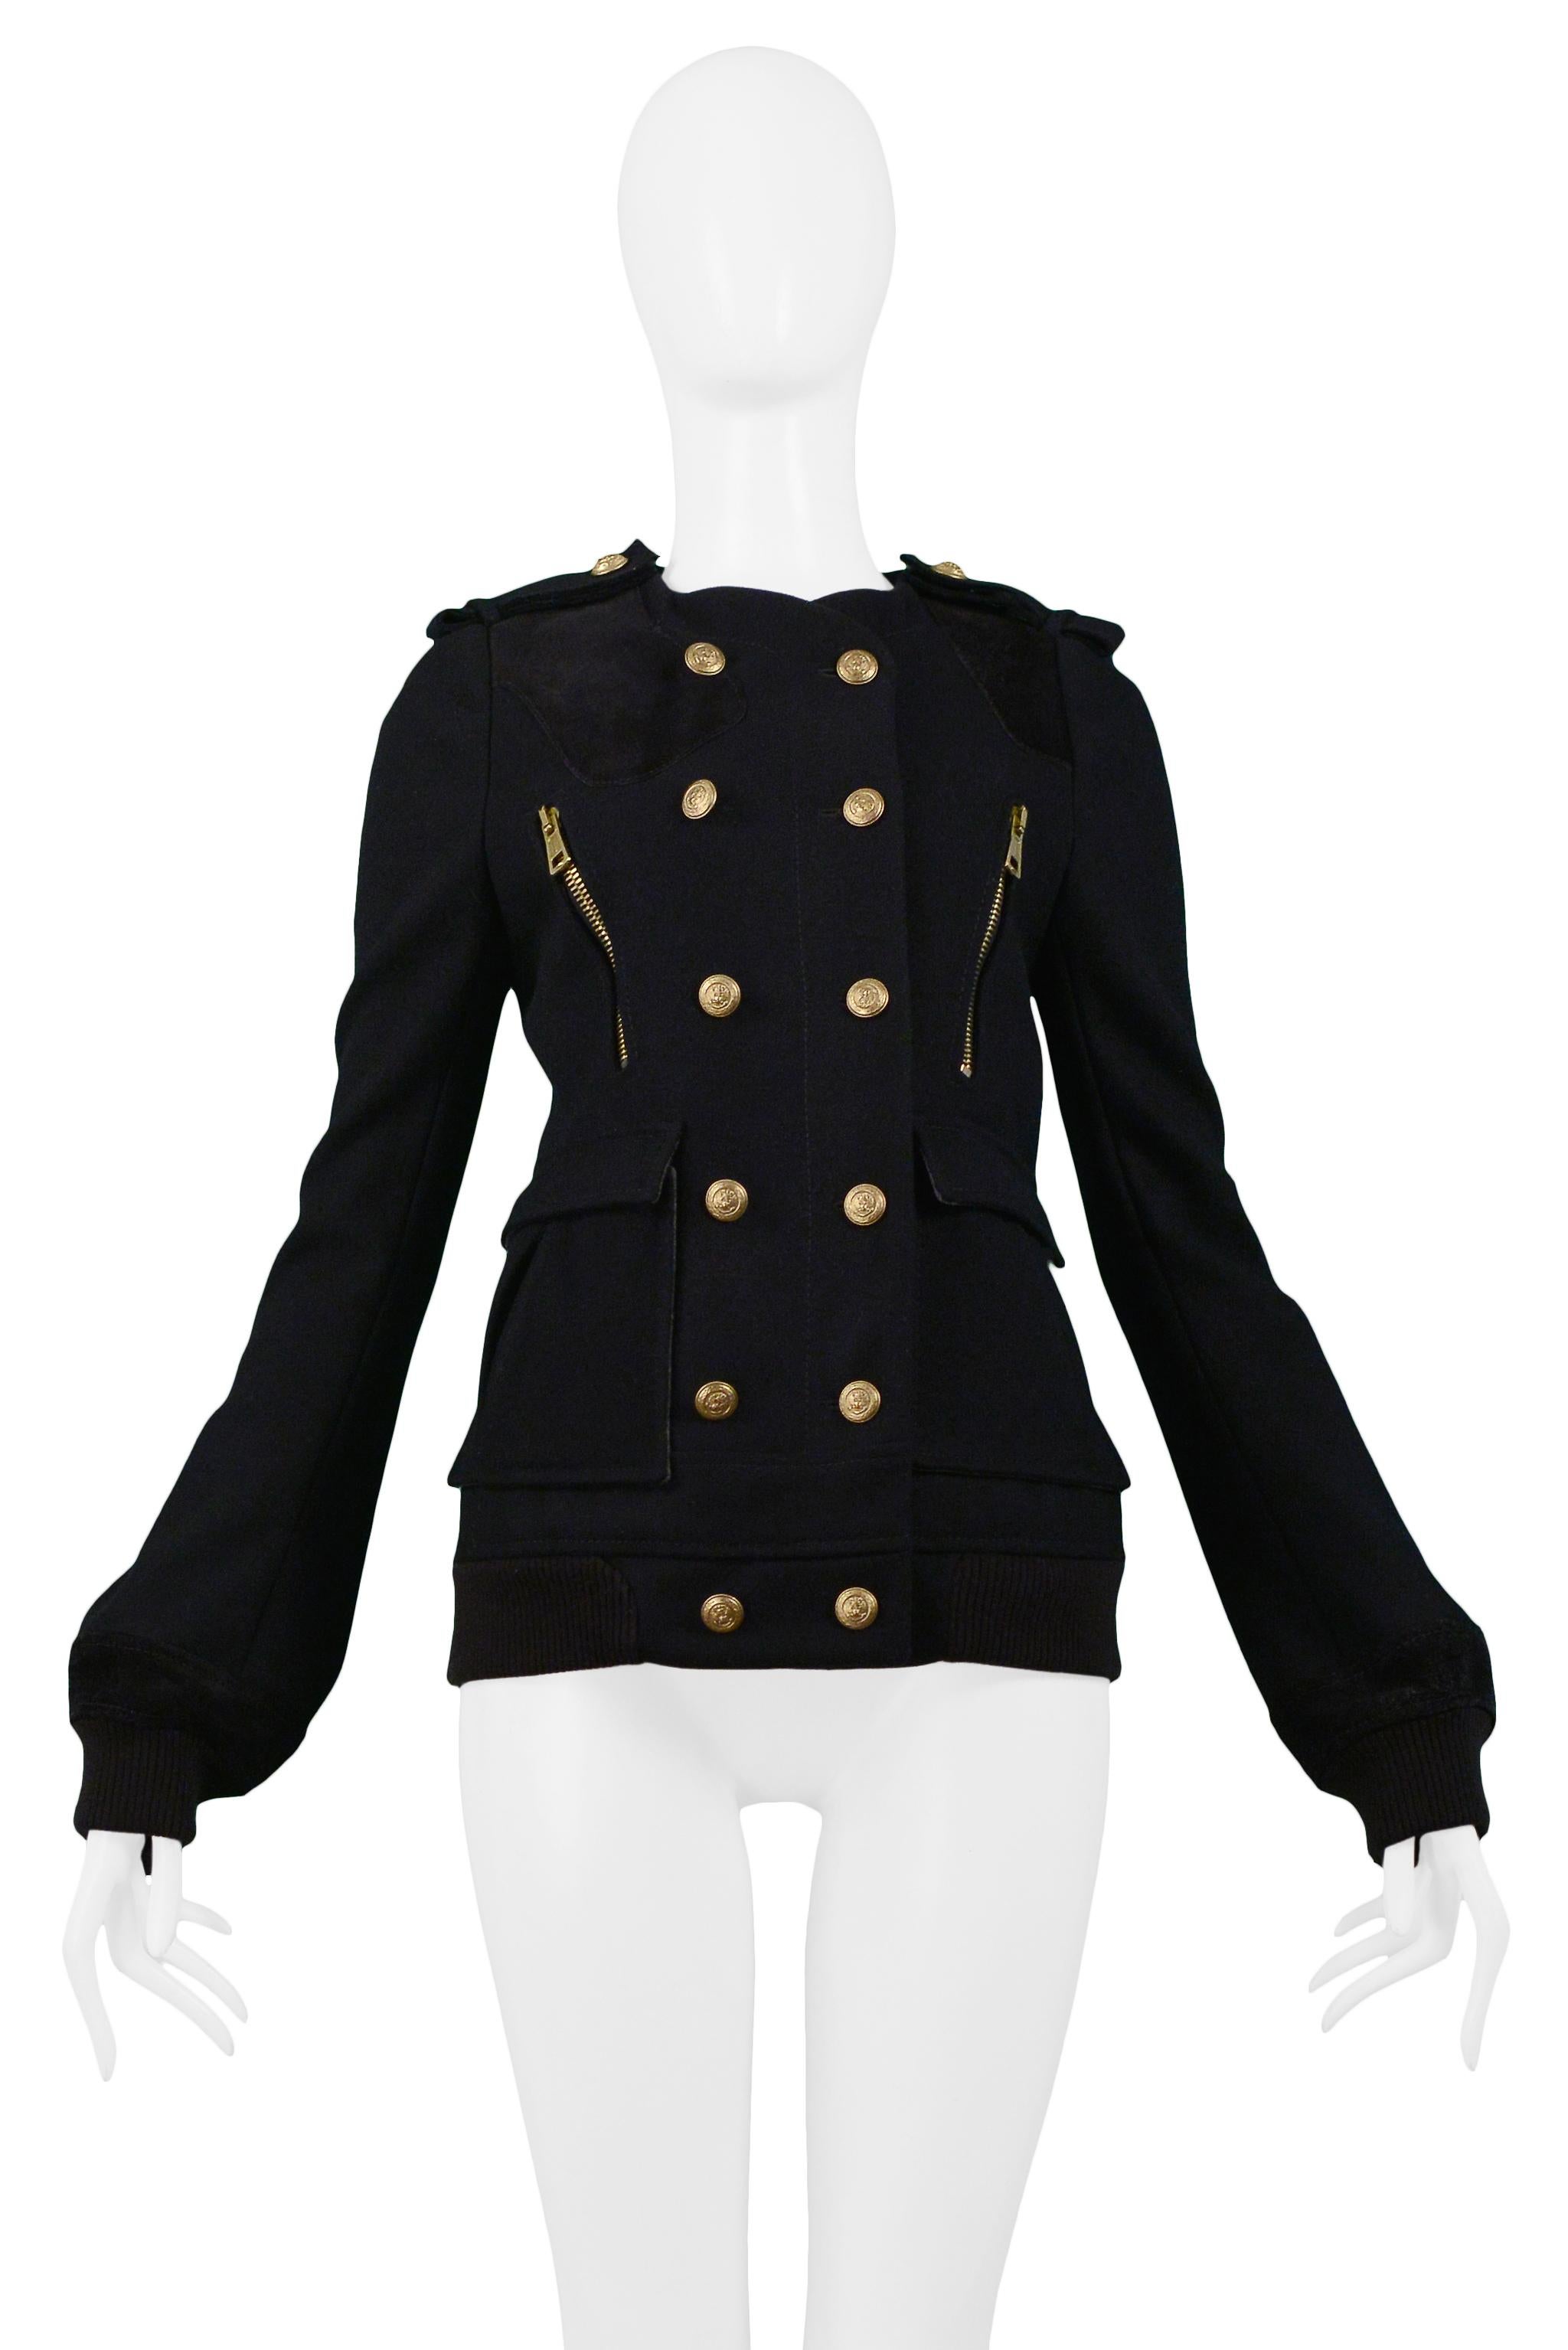 Resurrection is pleased to offer a vintage Balenciaga by Nicolas Ghesquiere black wool double-breasted military-inspired jacket with gold buttons at center front and shoulders, velvet patches at shoulders, flap pockets at hips, and knit bands at